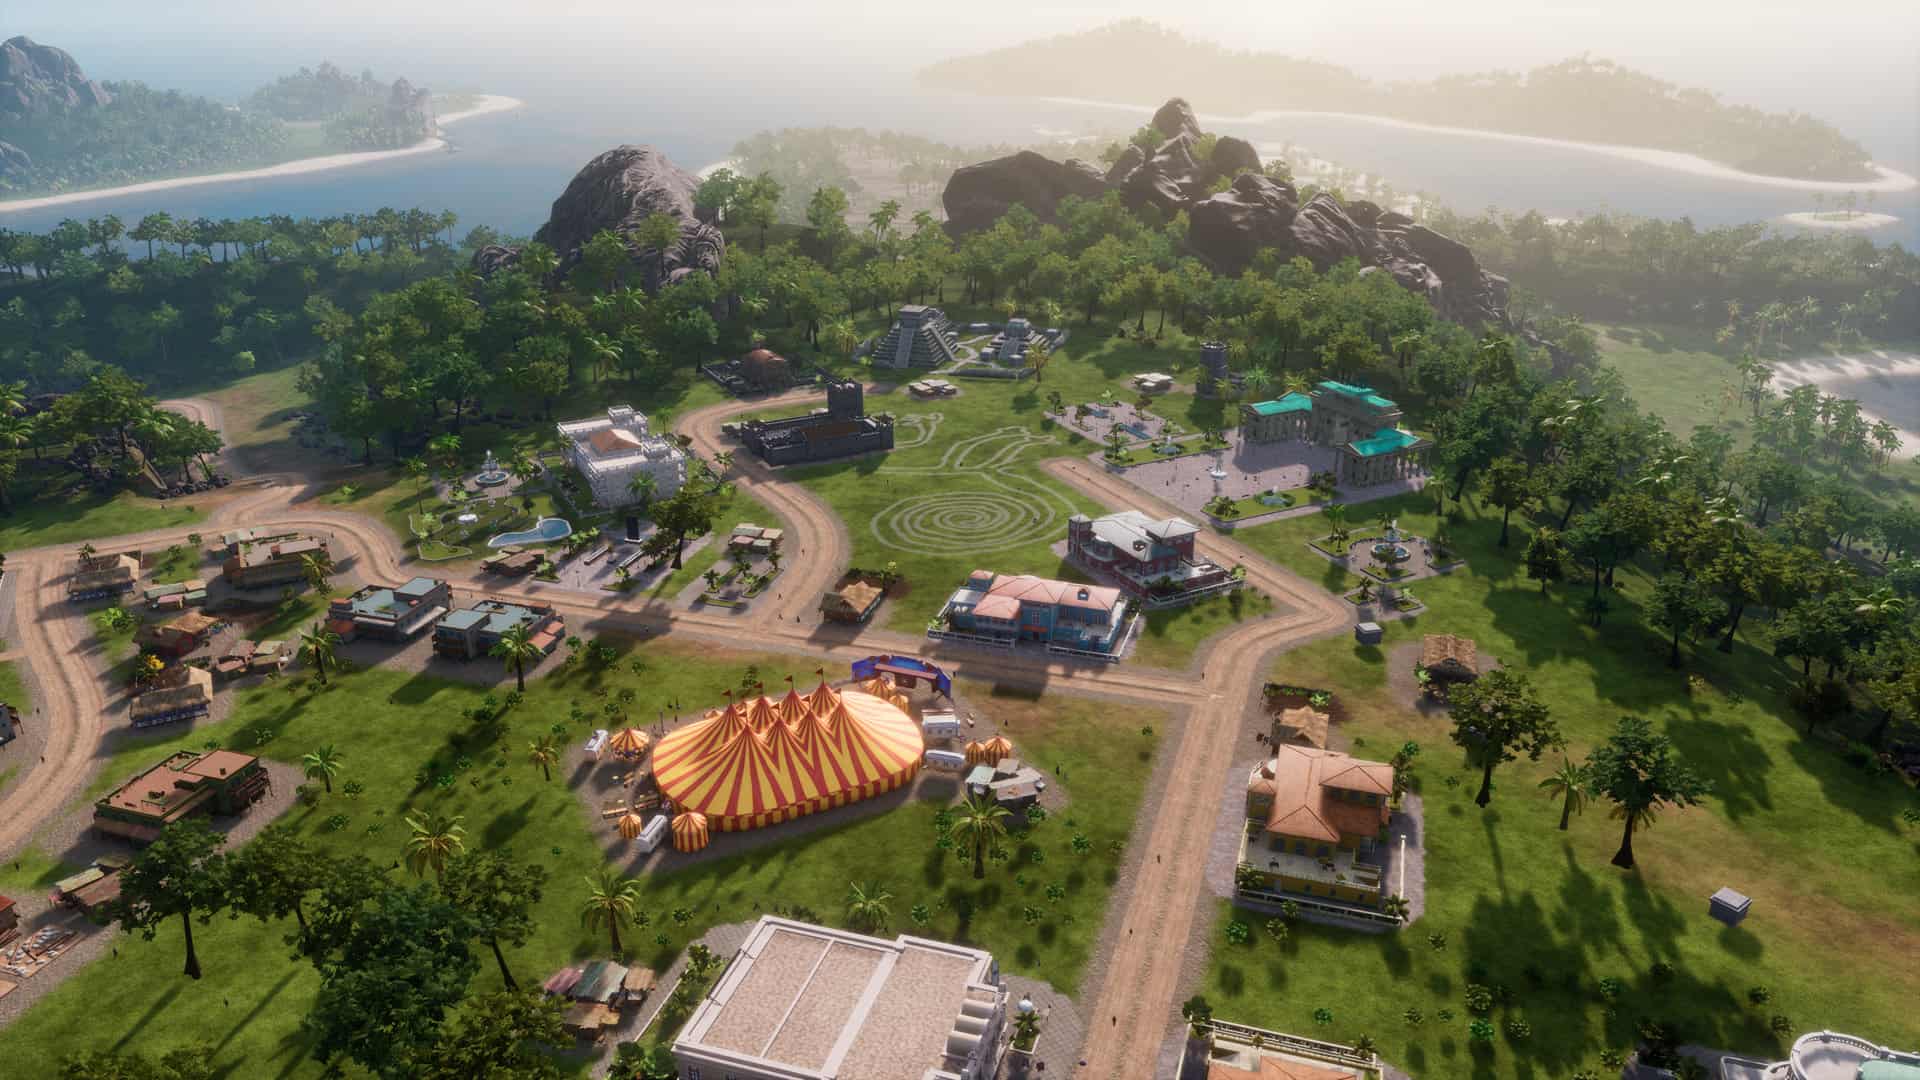 Tropico 6 heads to Xbox Series X|S and PlayStation 5 in Next Gen Edition in March 2022